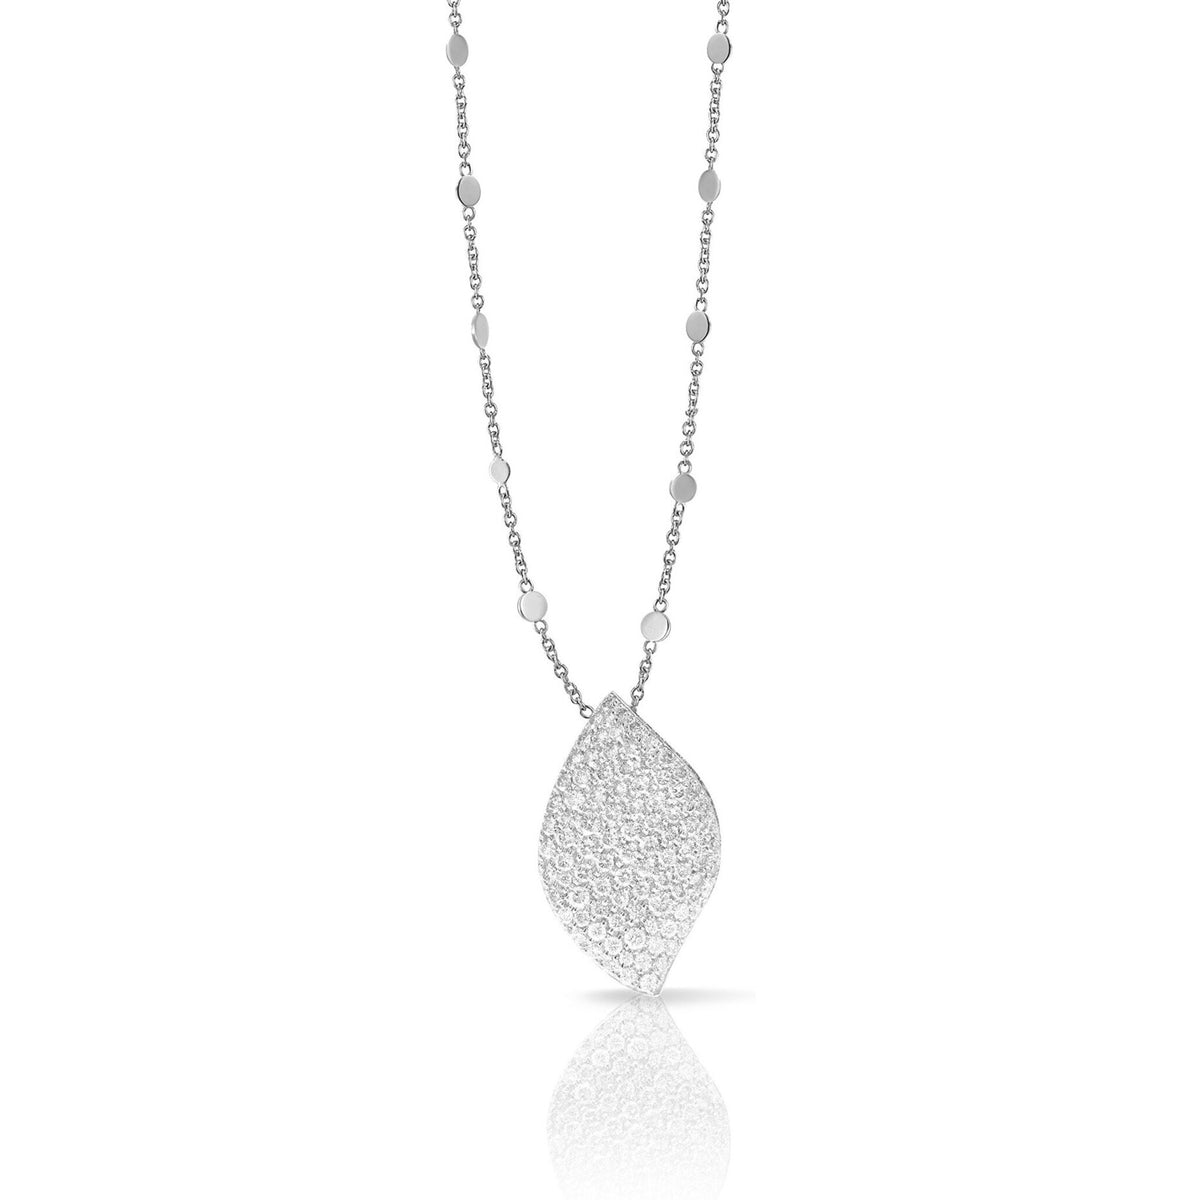 Pasquale Bruni - Aleluiá Necklace in 18k White Gold with White Diamonds